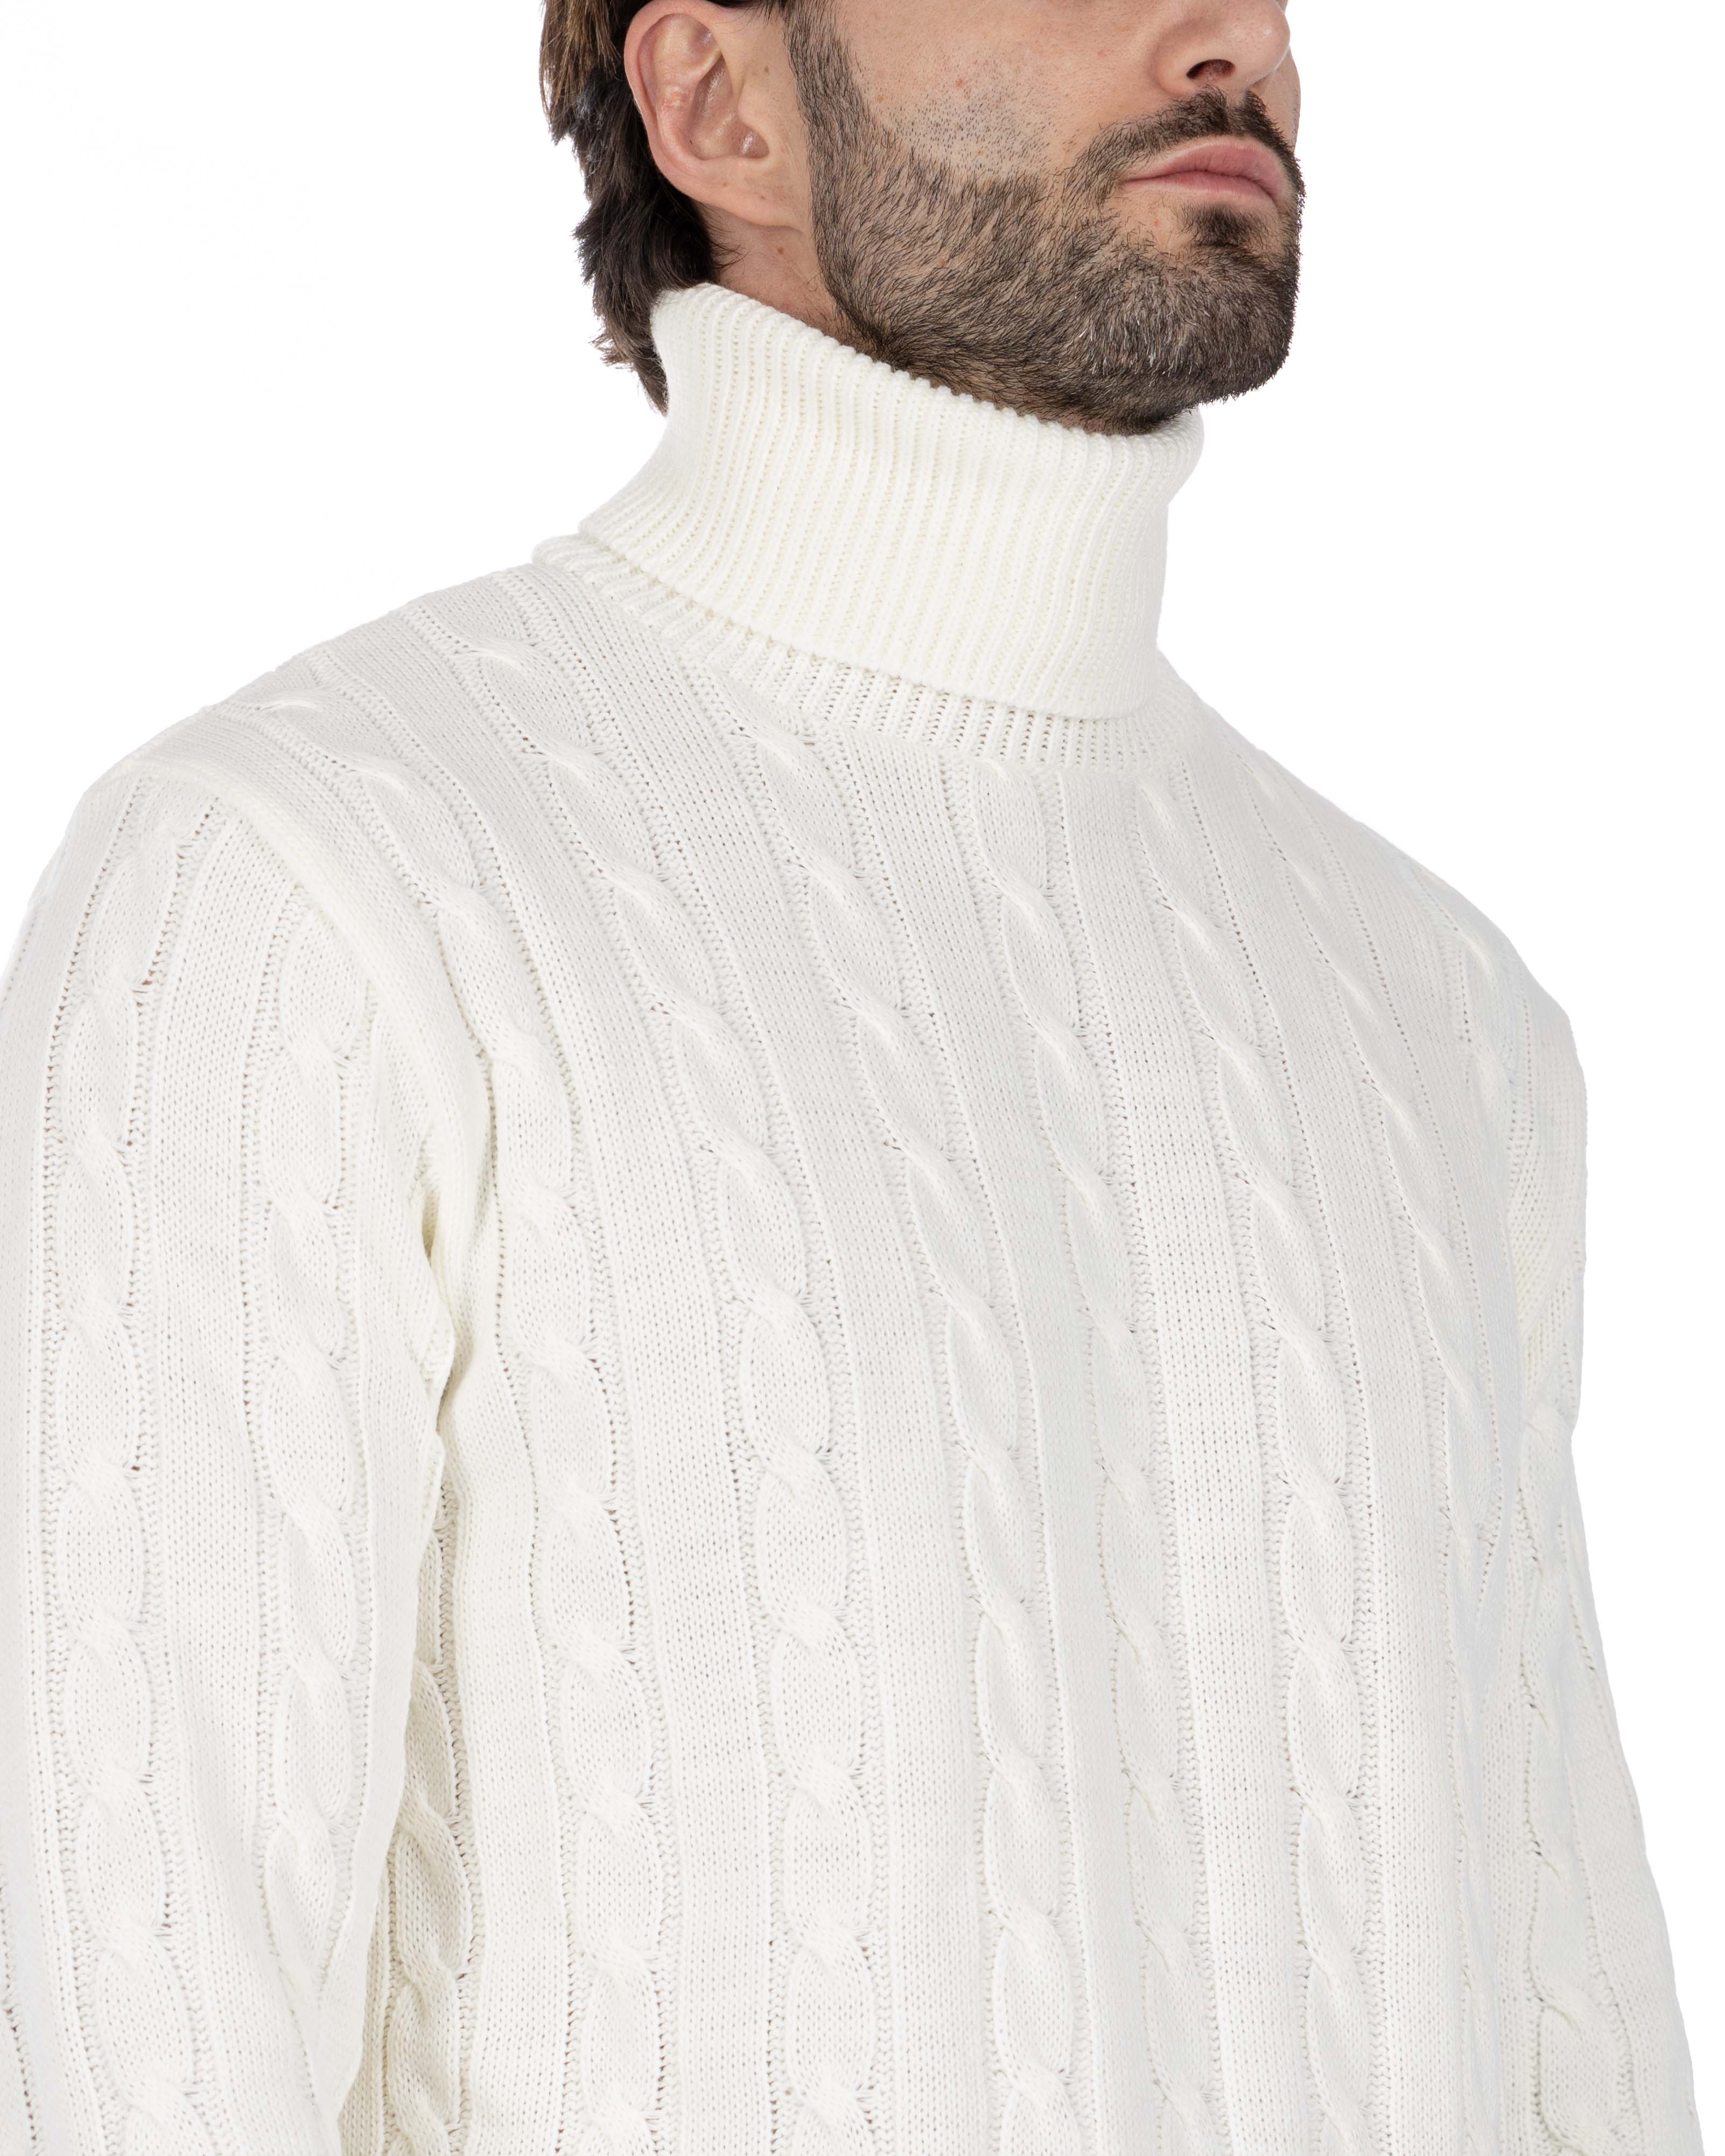 Crovie - white turtleneck sweater with cables